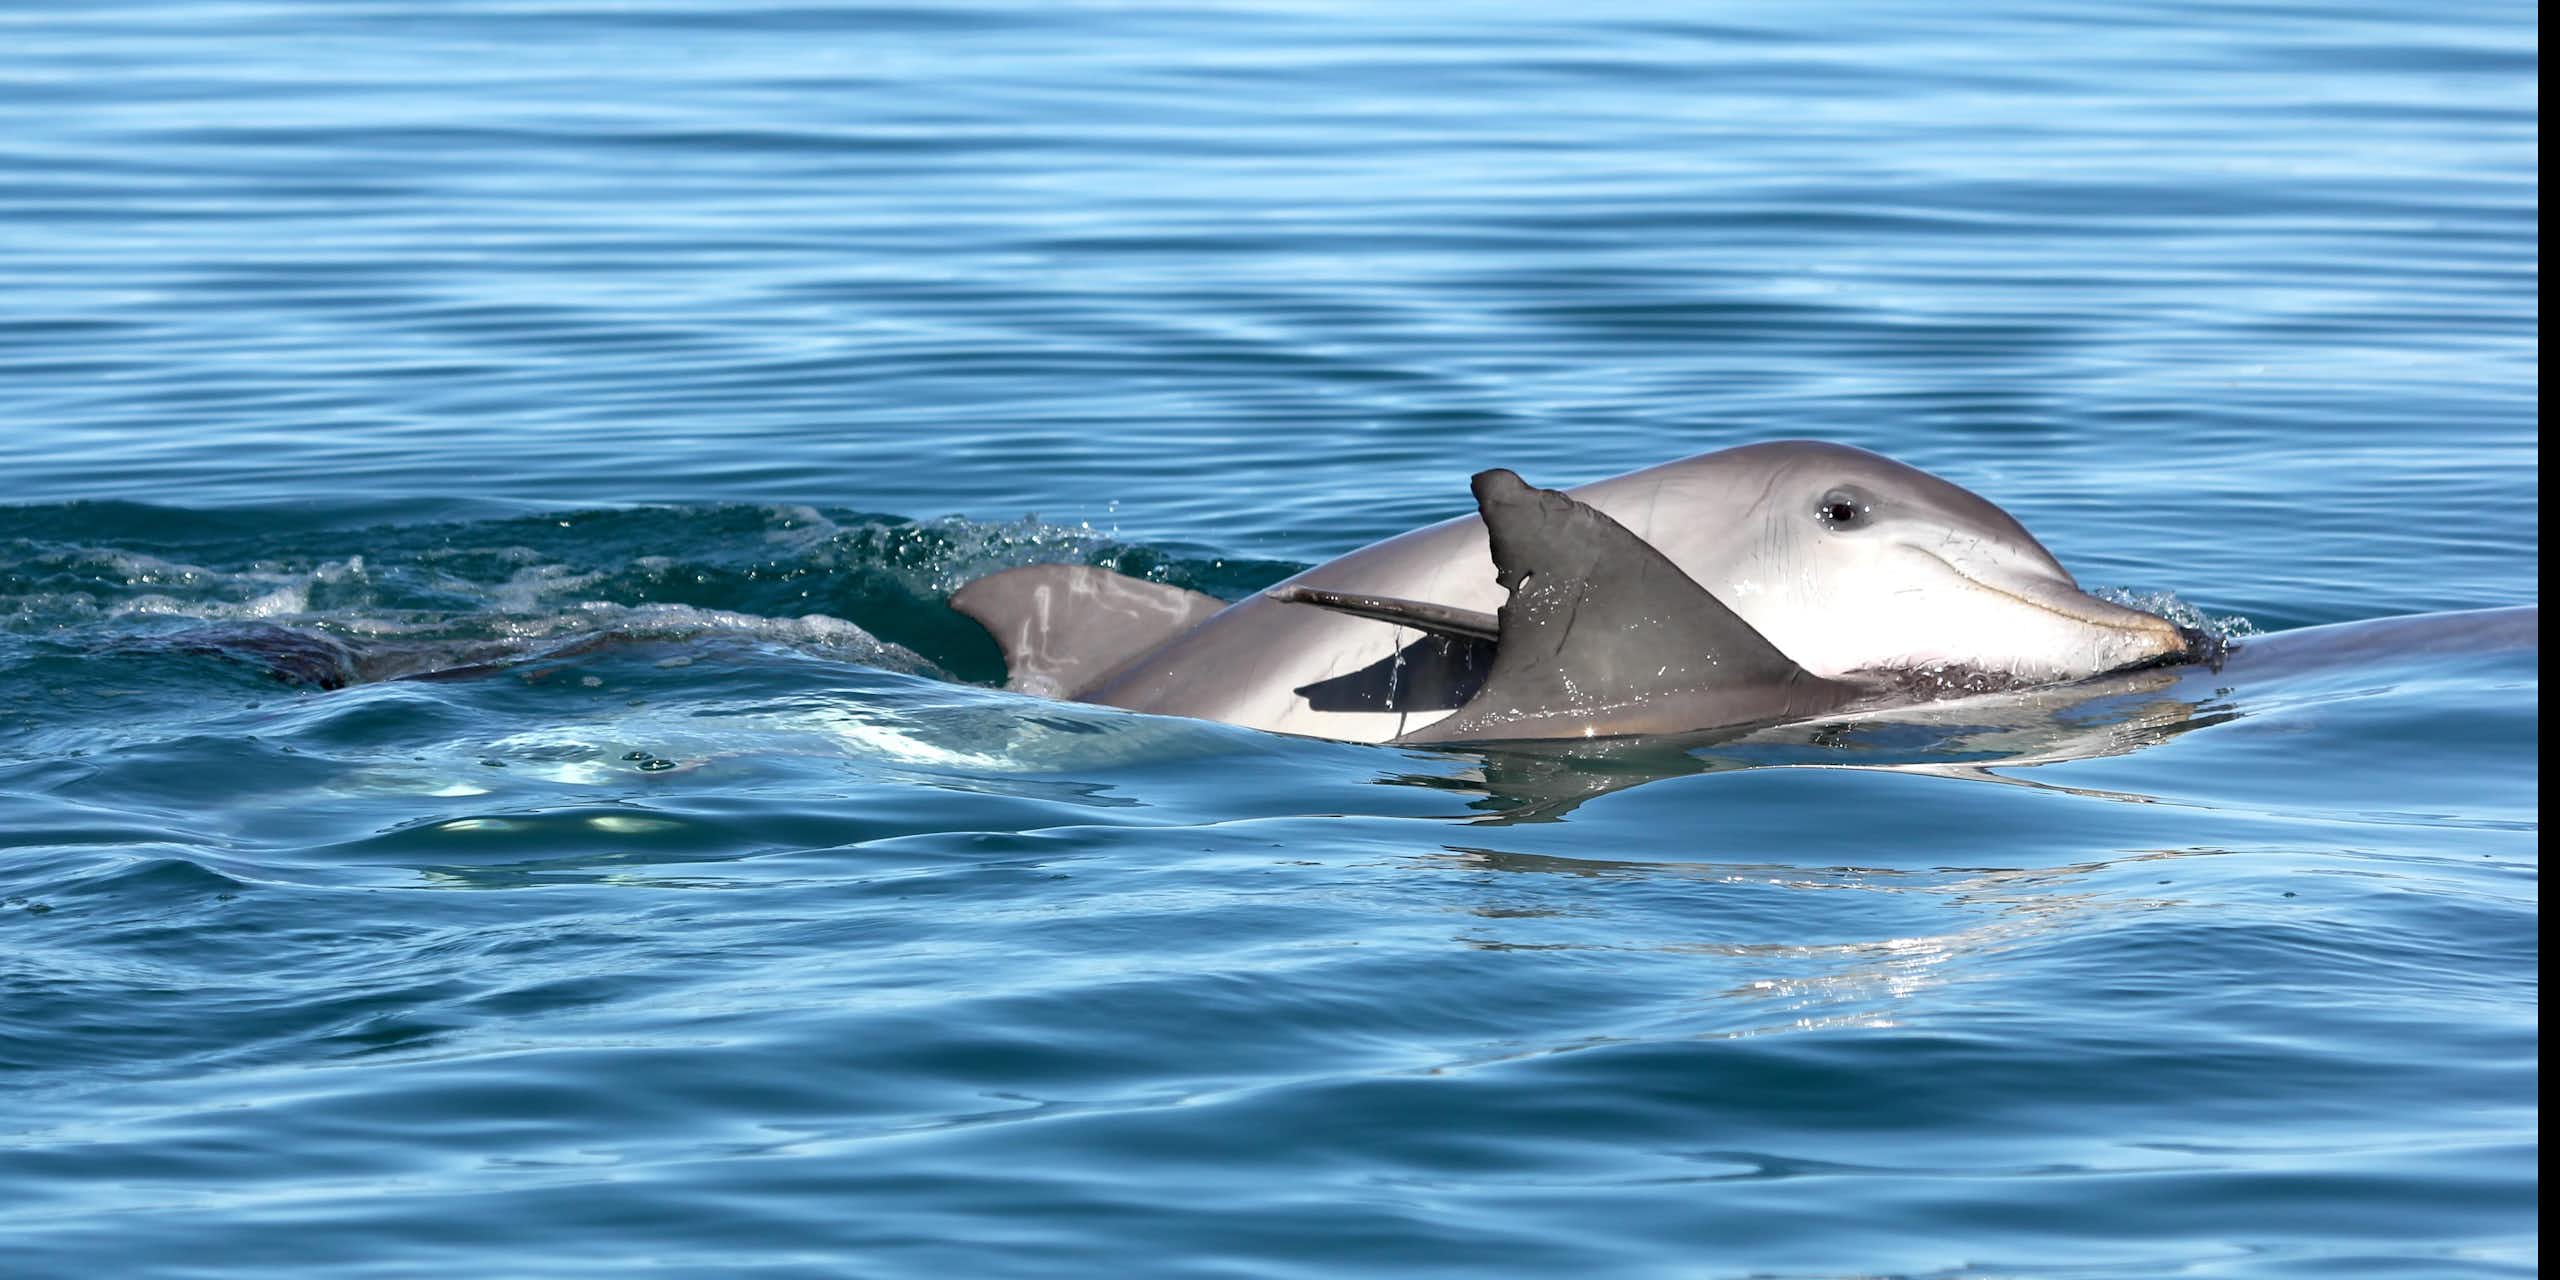 Photo showing two dolphins swimming together closely.